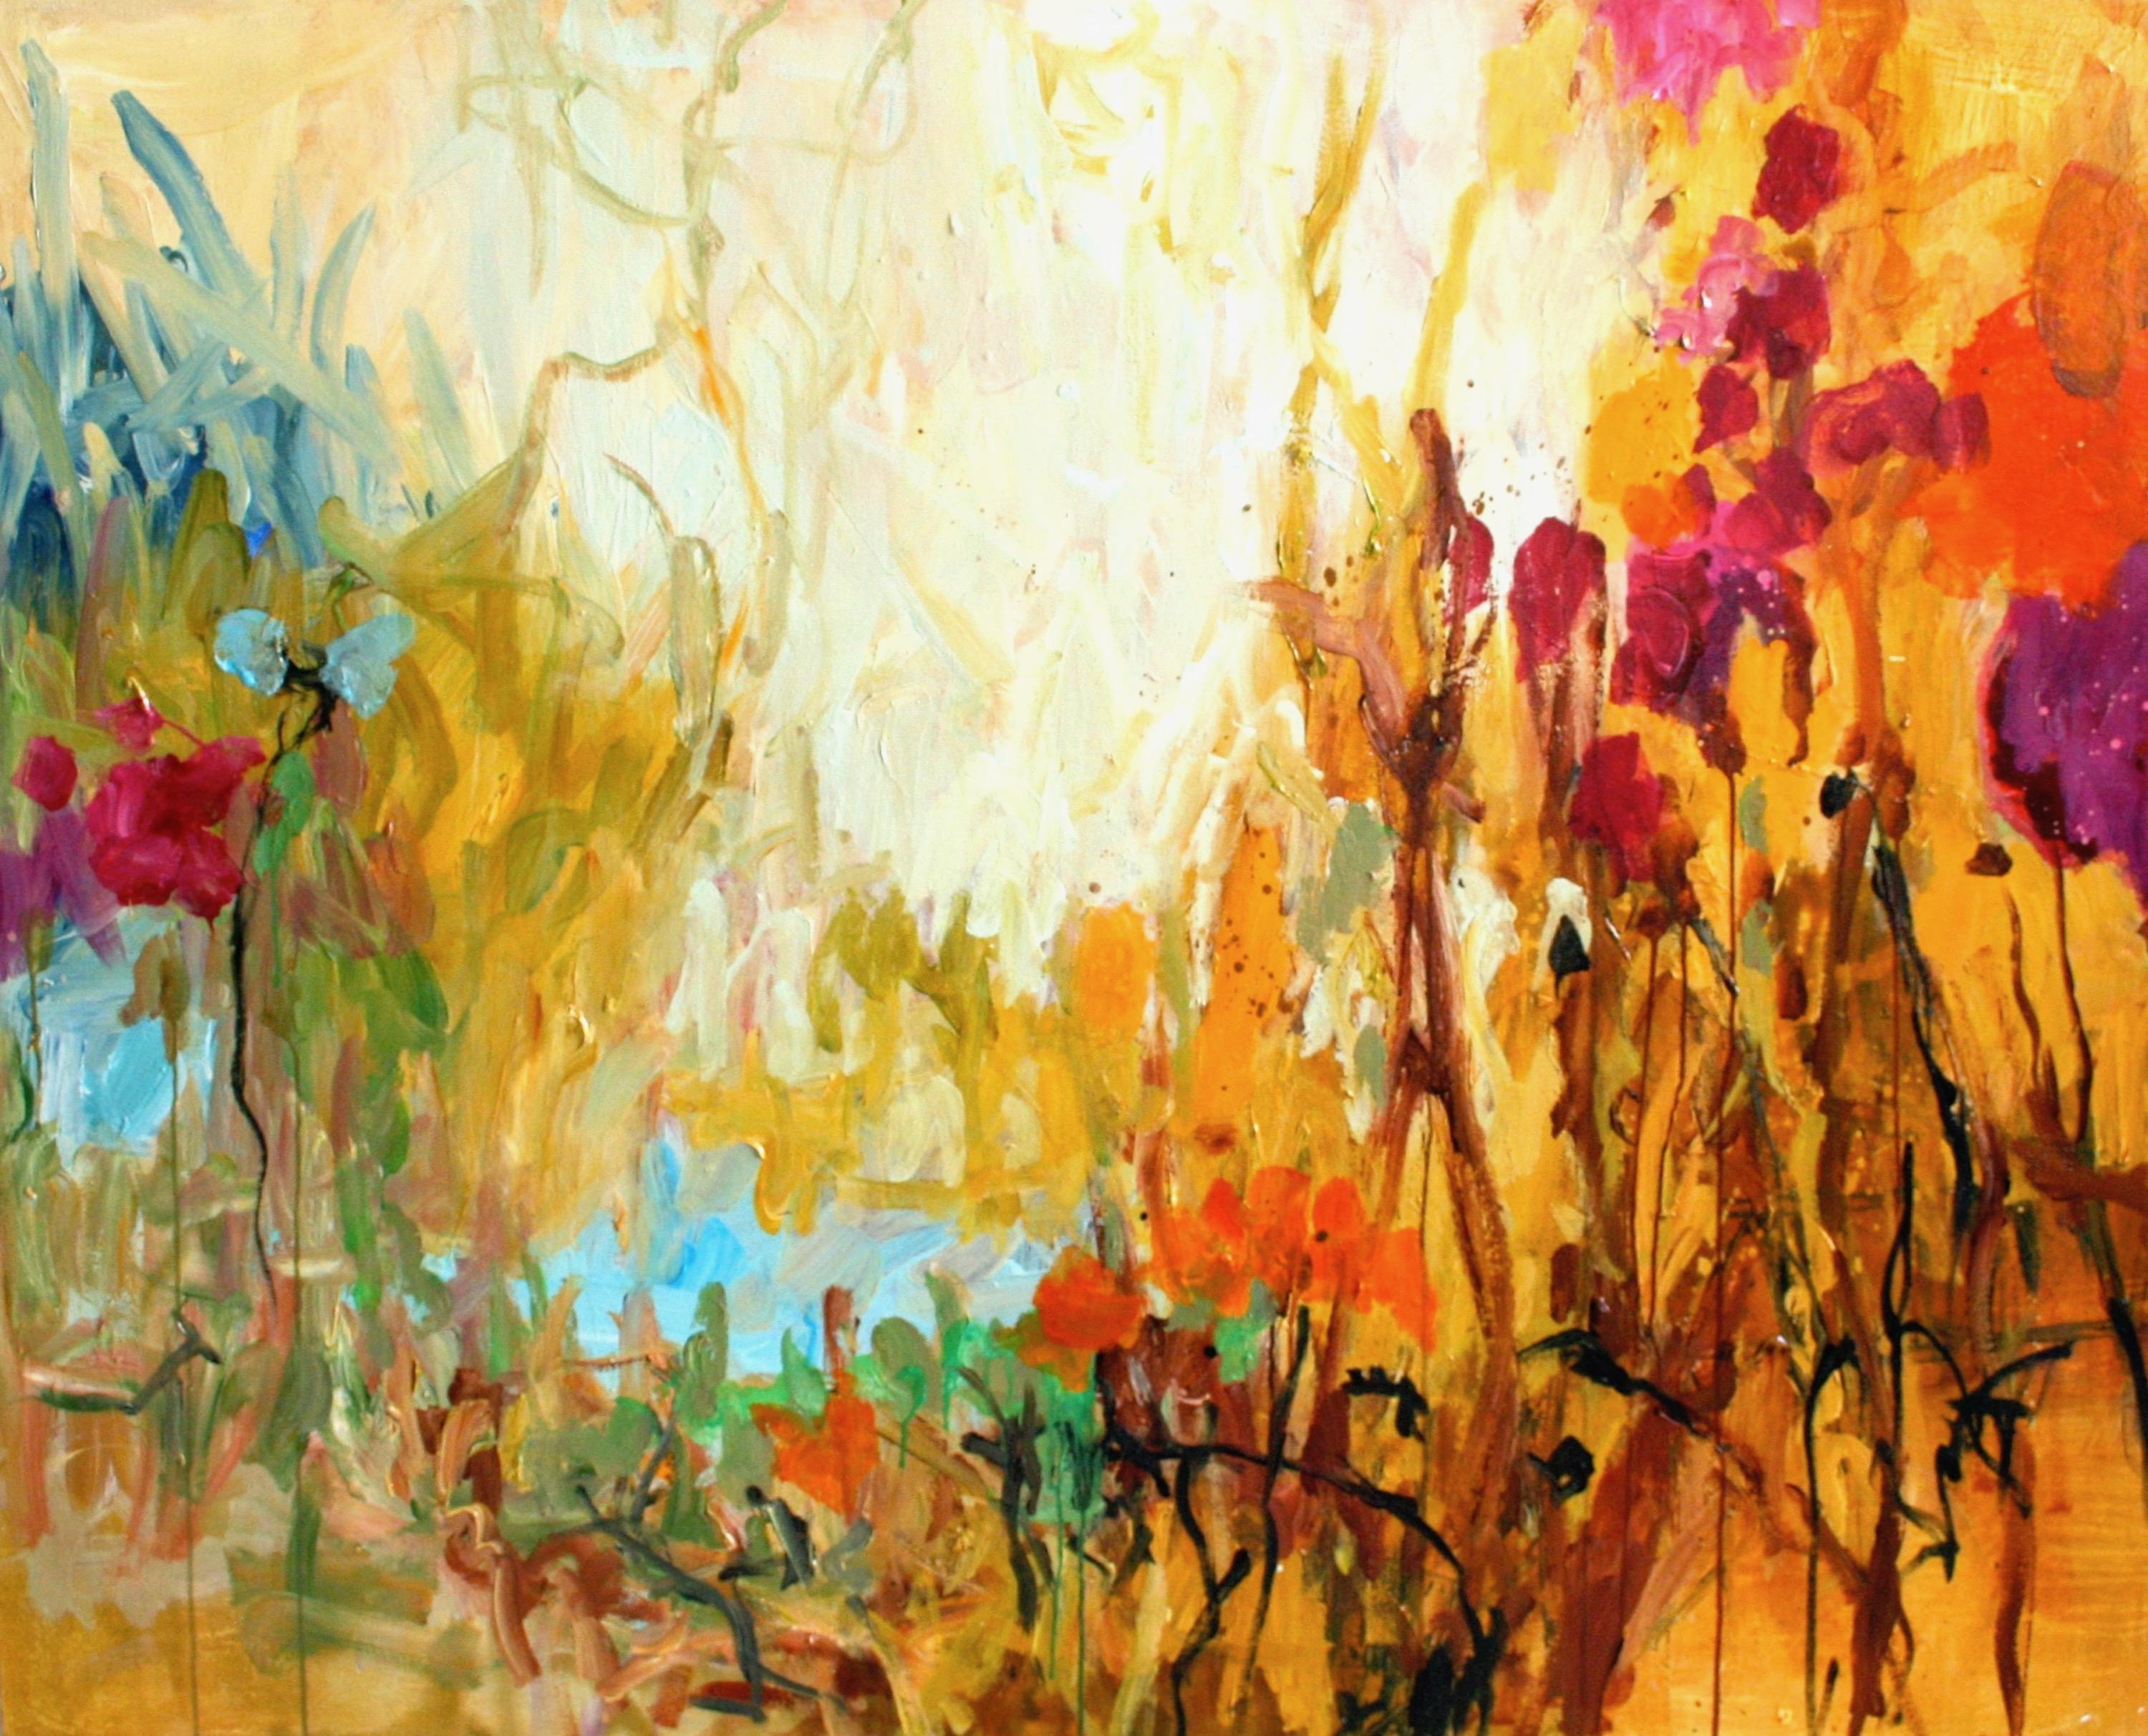 Along the River #3 (abstract, flowers, river's edge) - Mixed Media Art by Allison Stewart